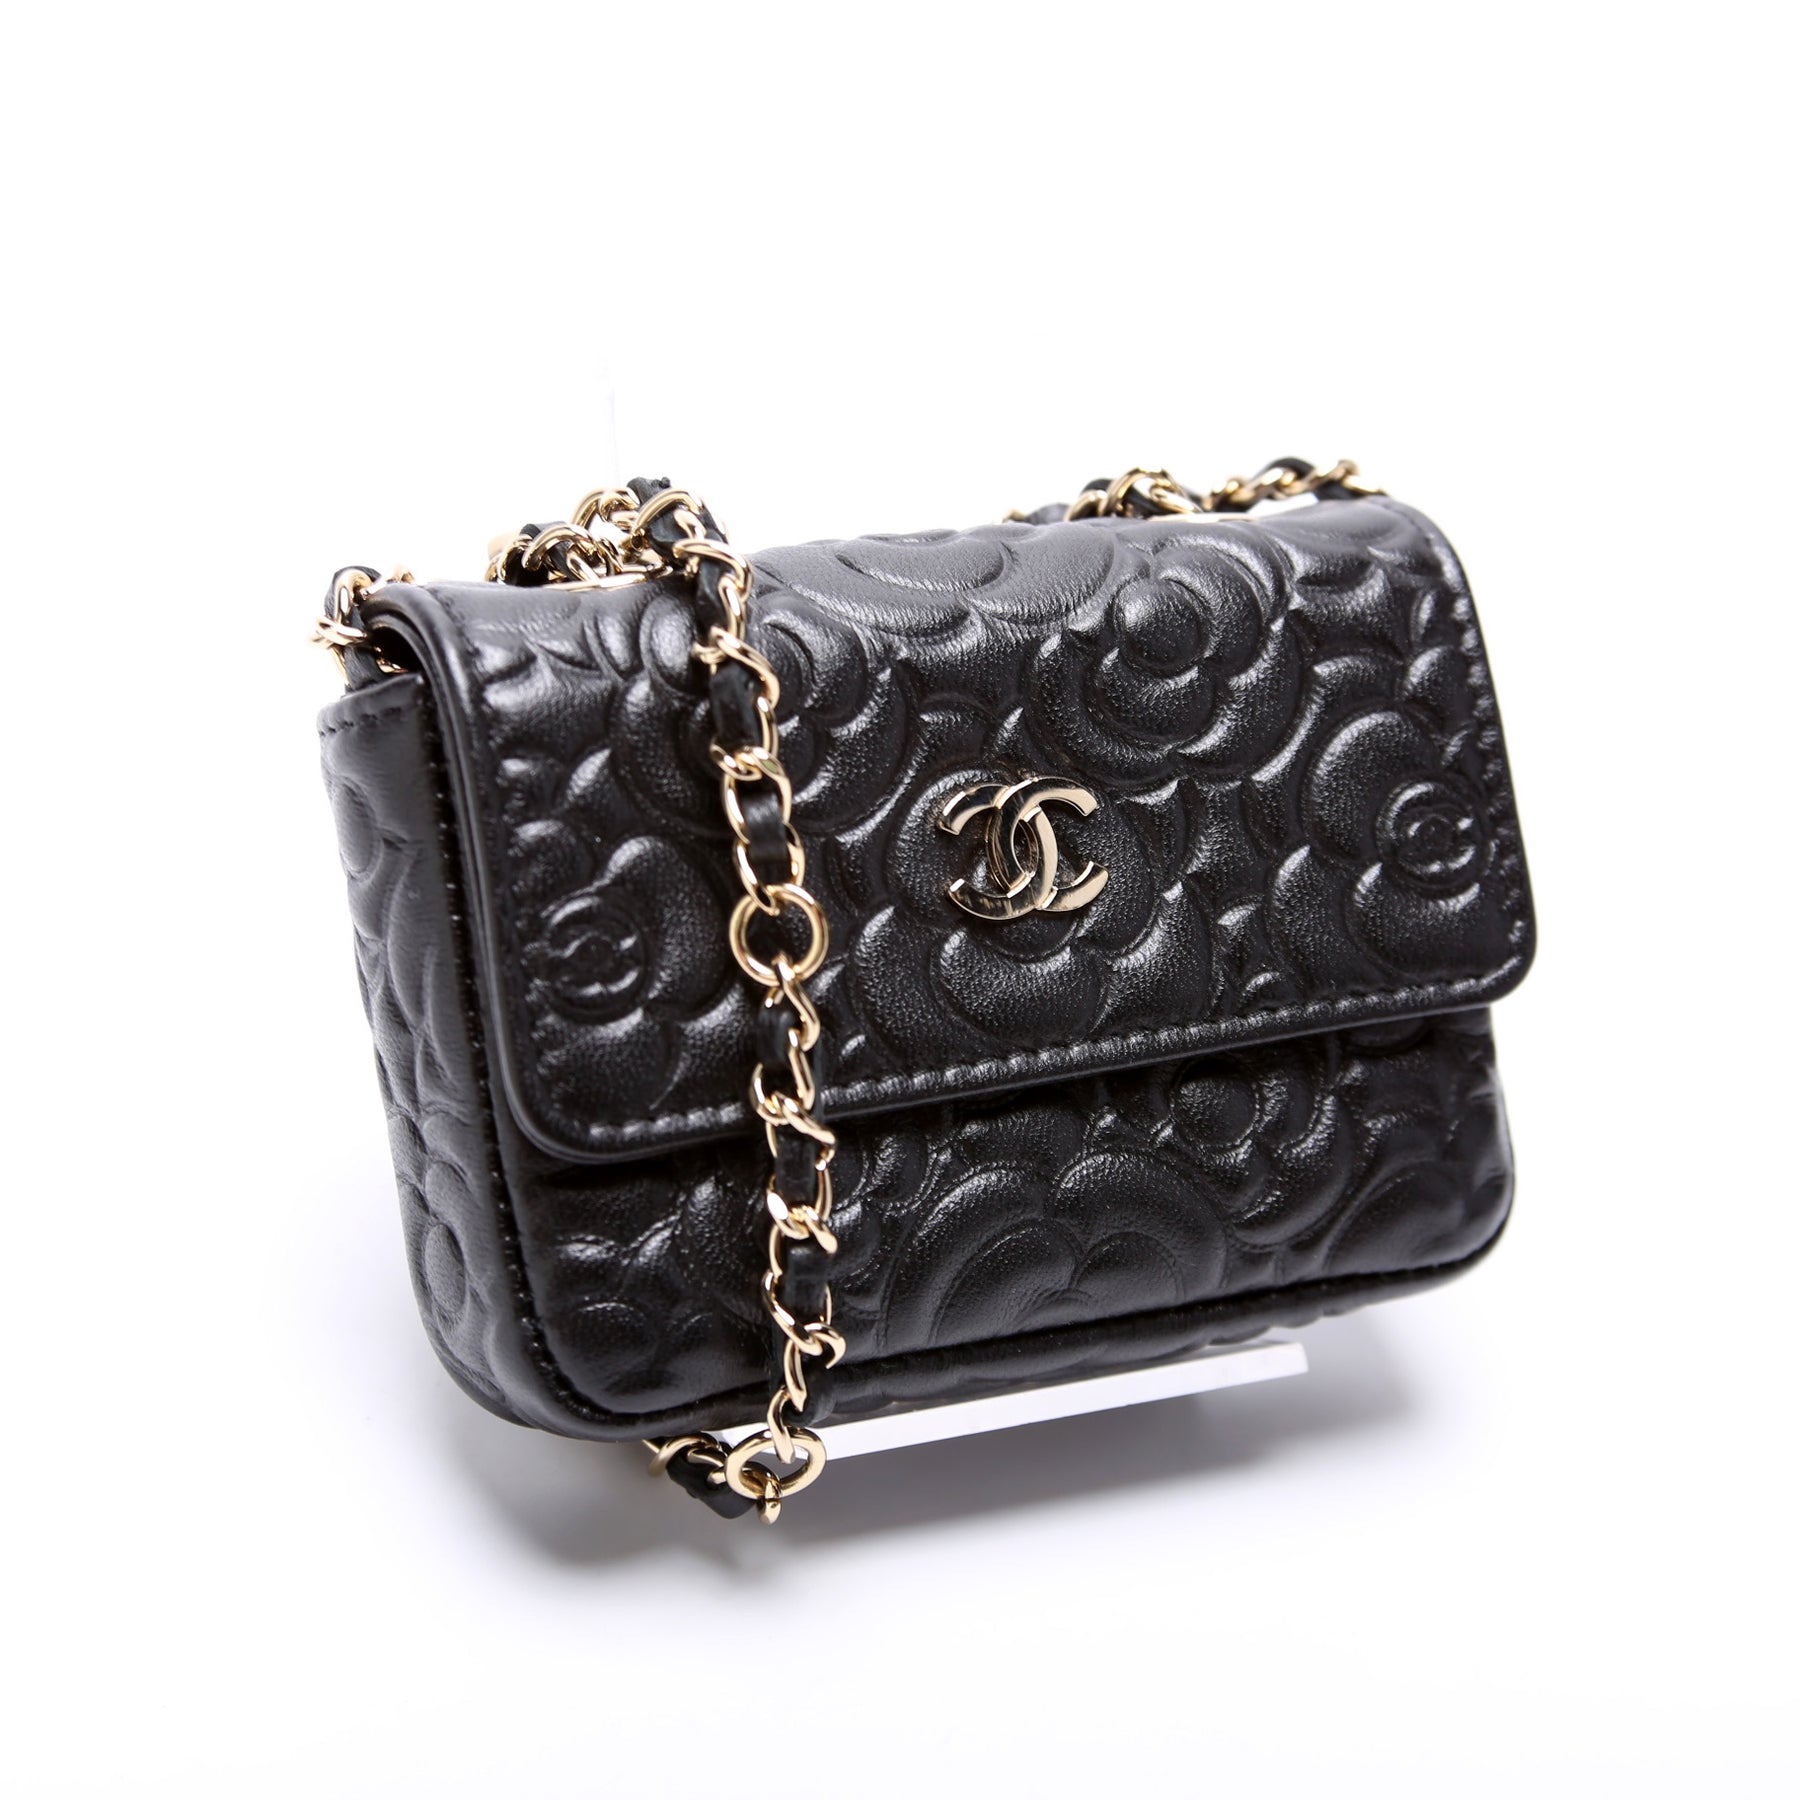 11 Chanel camellia tote - AWL3258 – LuxuryPromise